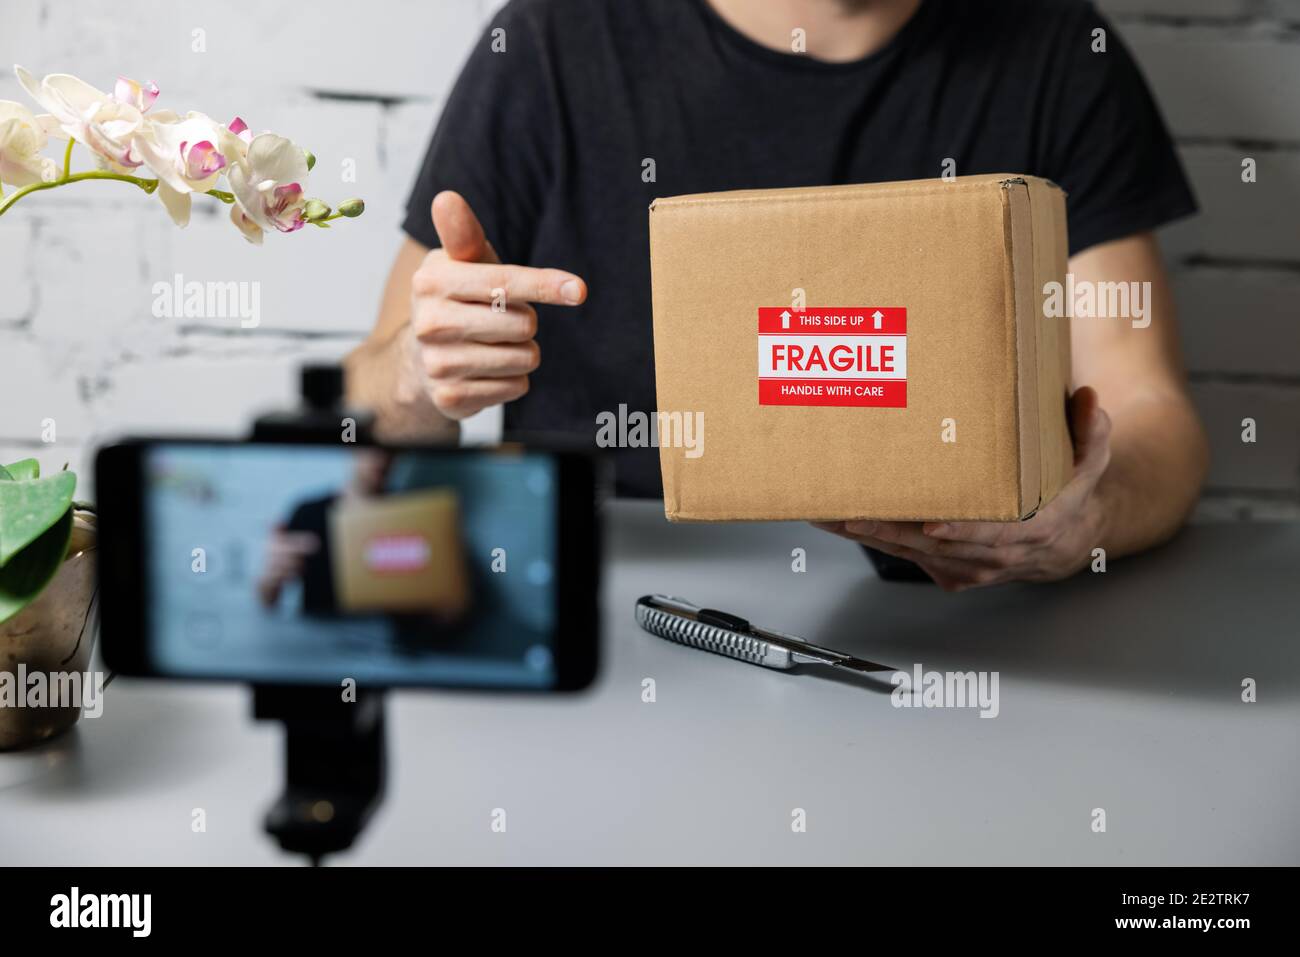 social media influencer recording product unboxing video. online marketing Stock Photo